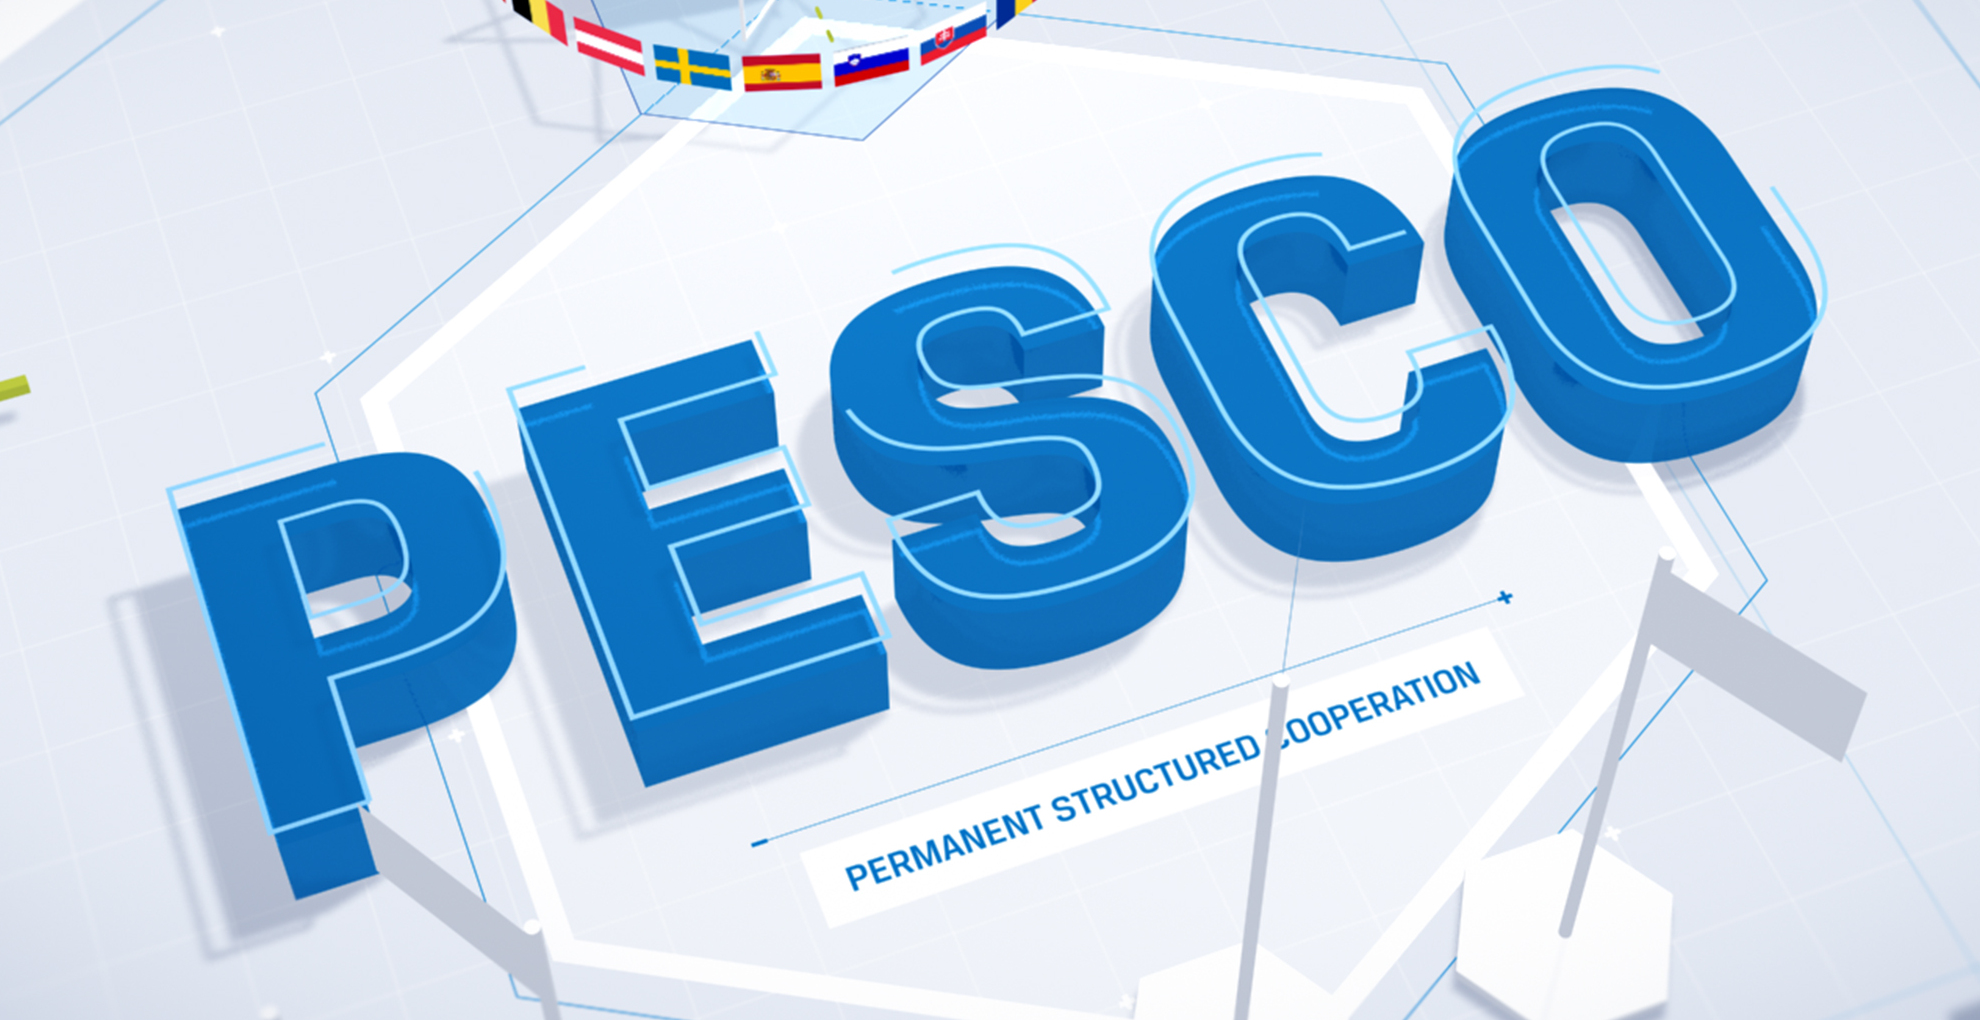 11 new PESCO projects focus on critical defence capabilities and interoperability